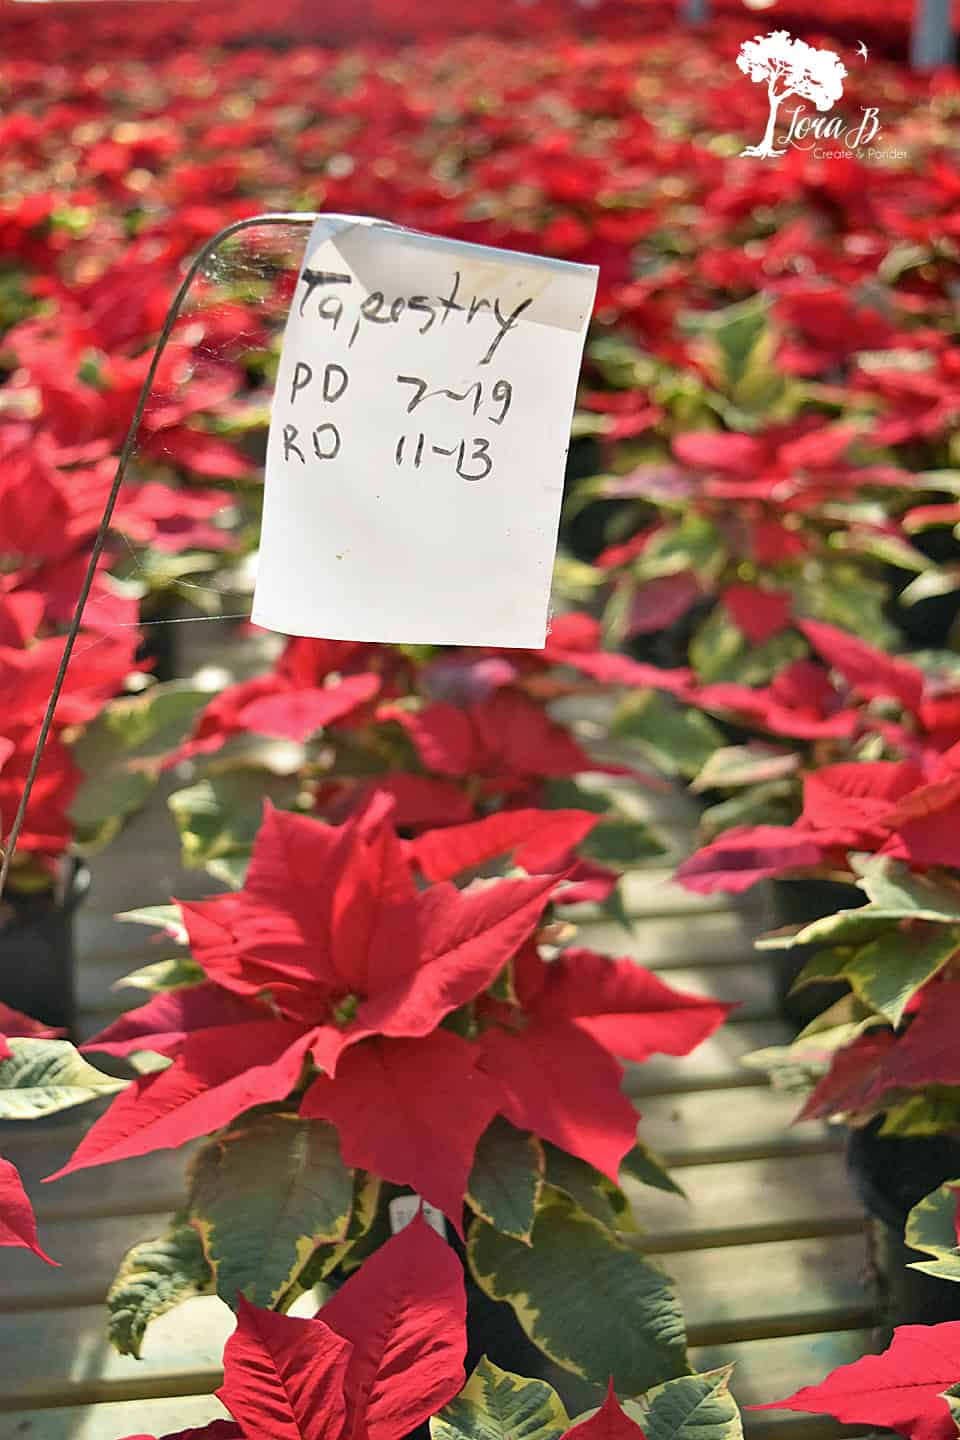 Poinsettias growing in the greenhouse